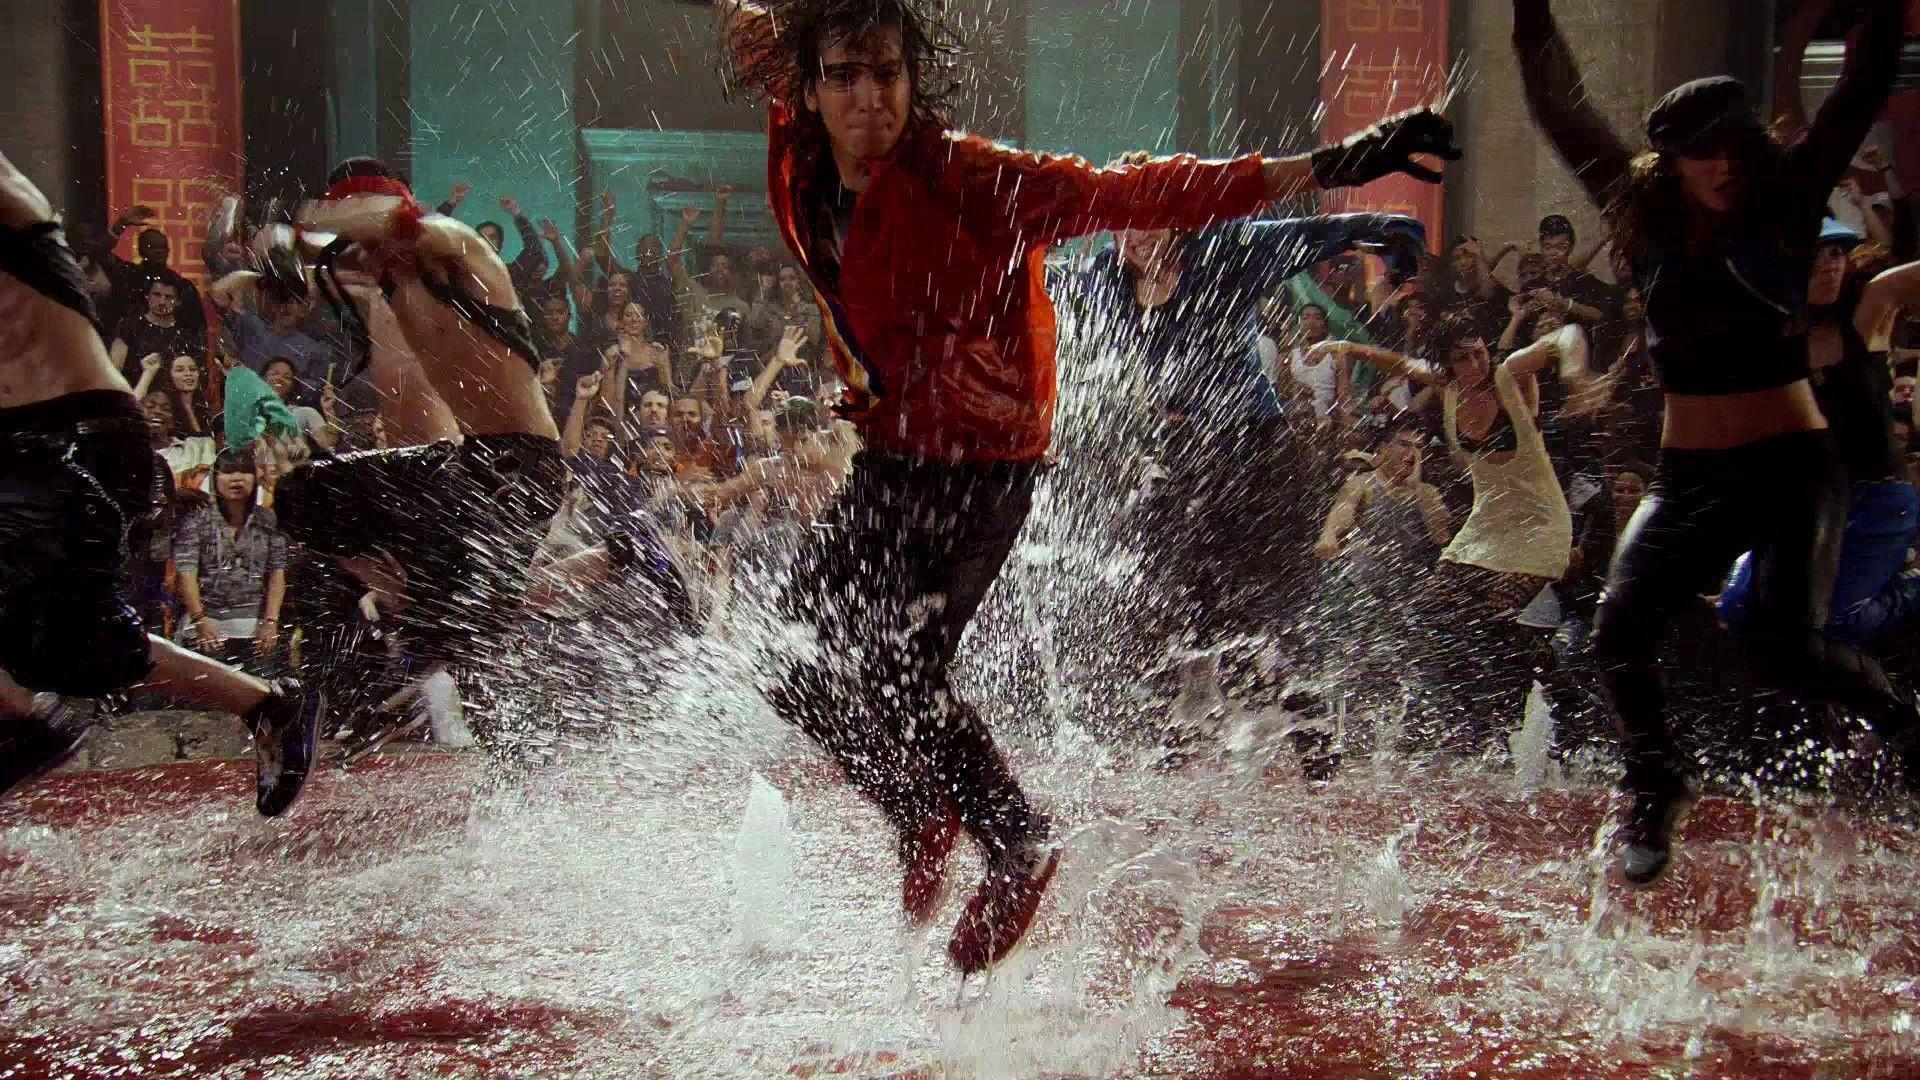 The Movie Step Up wallpaper and image, picture, photo